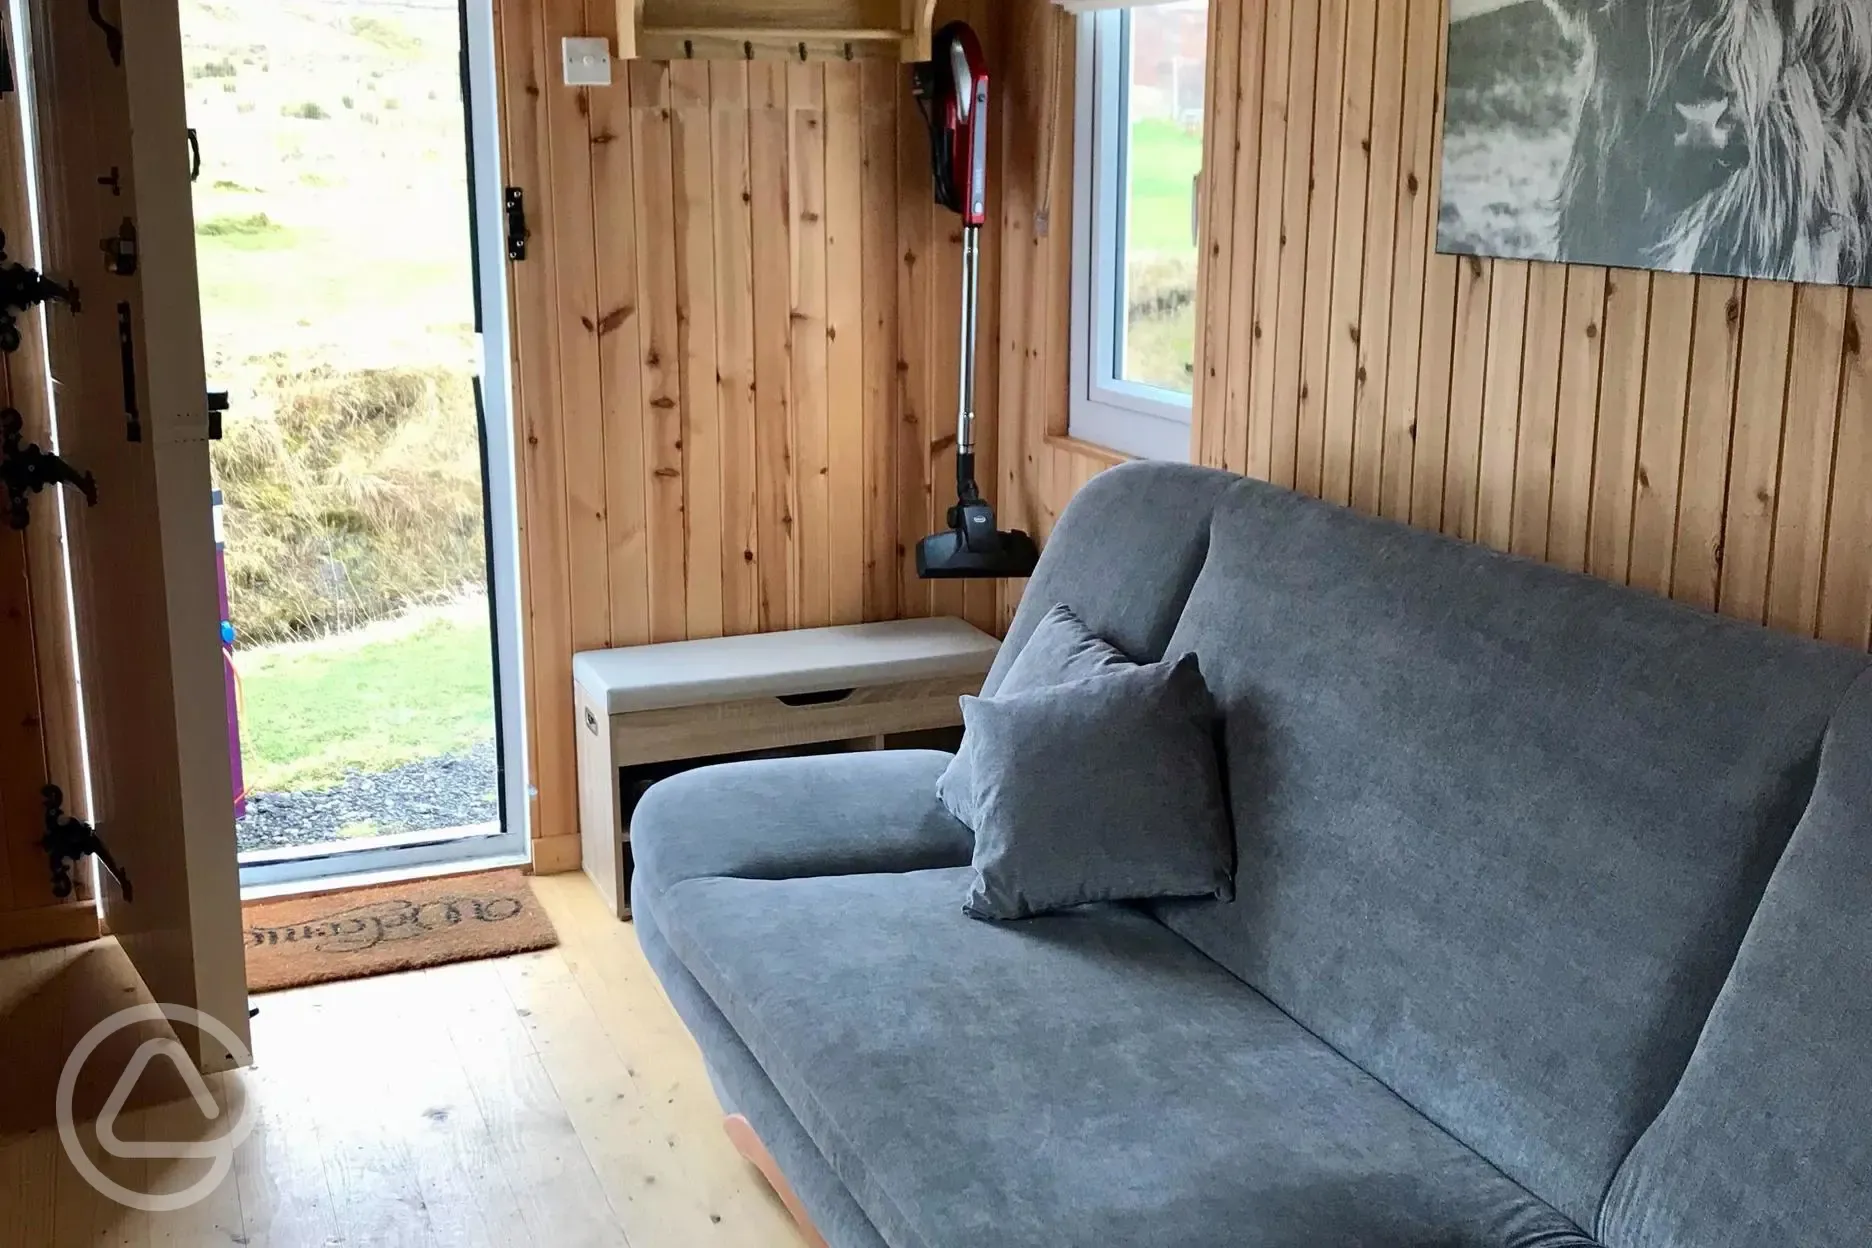 Shepherds hut - interior with sofa bed